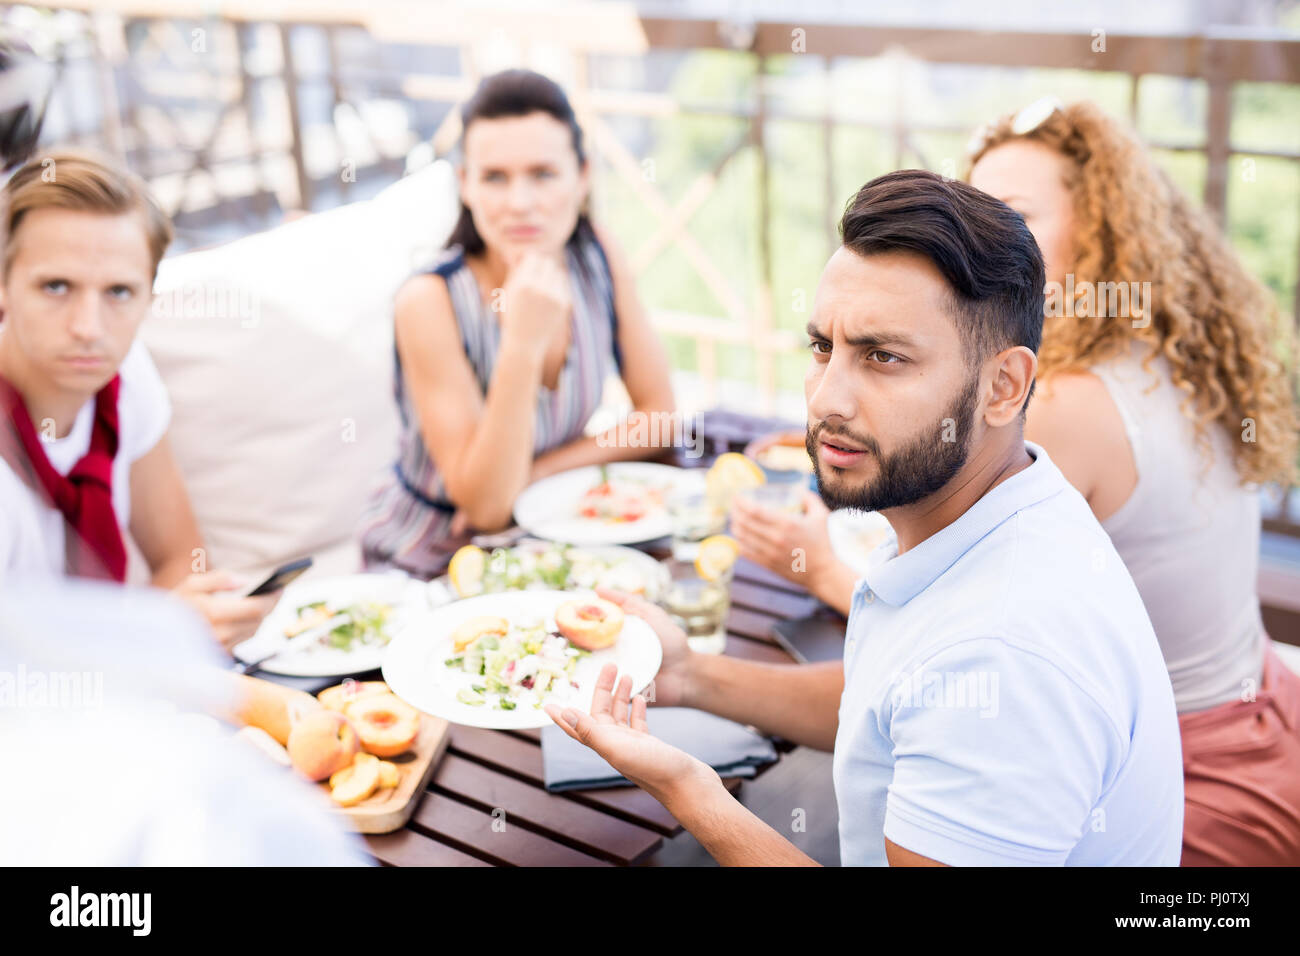 Unhappy Client in Cafe Stock Photo